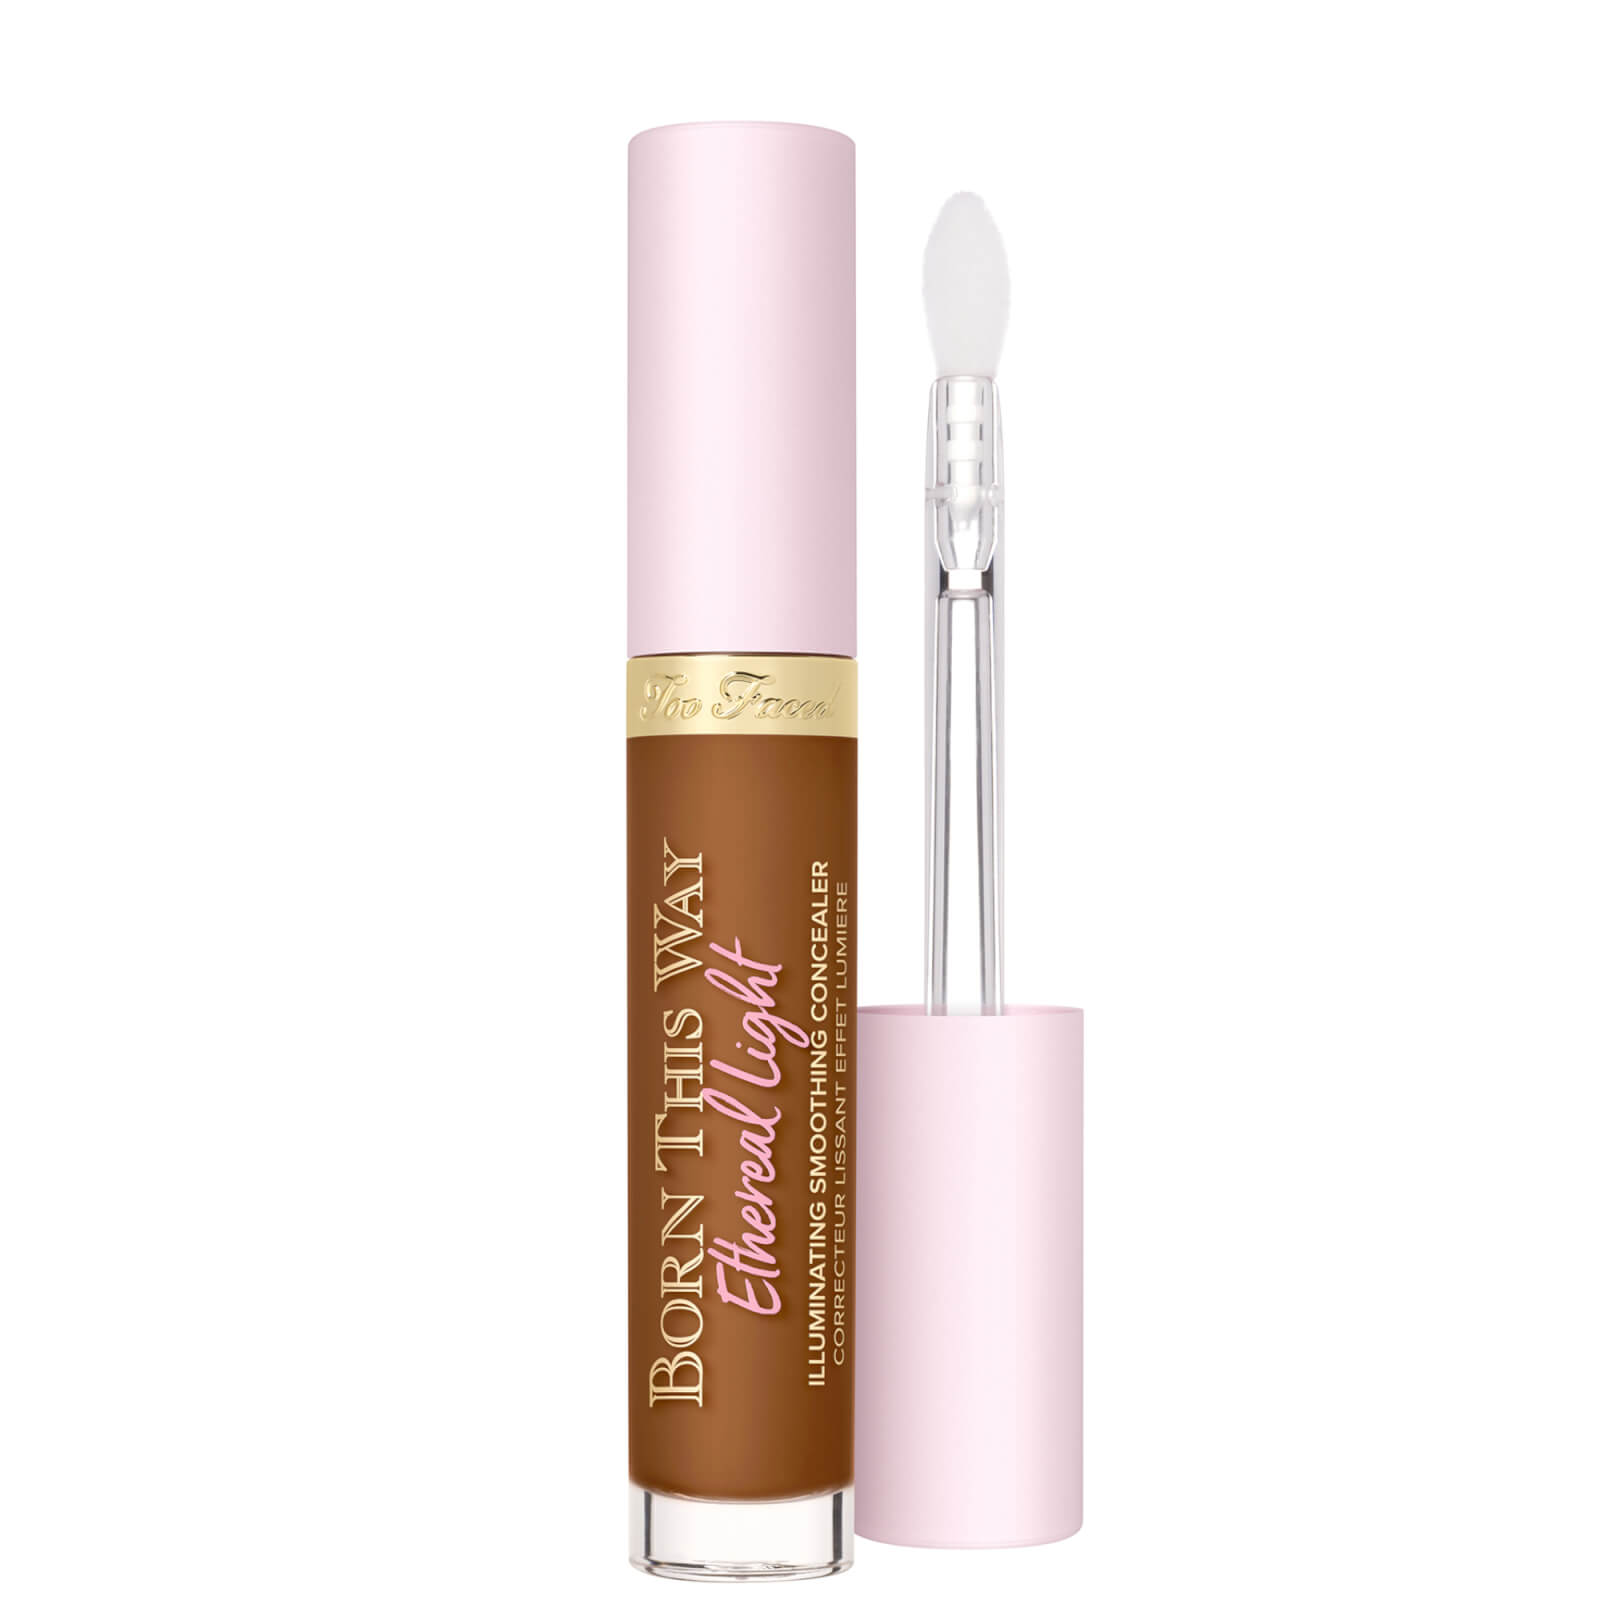 Too Faced Born This Way Ethereal Light Illuminating Smoothing Concealer 15ml (Various Shades) - Chocolate Truffle